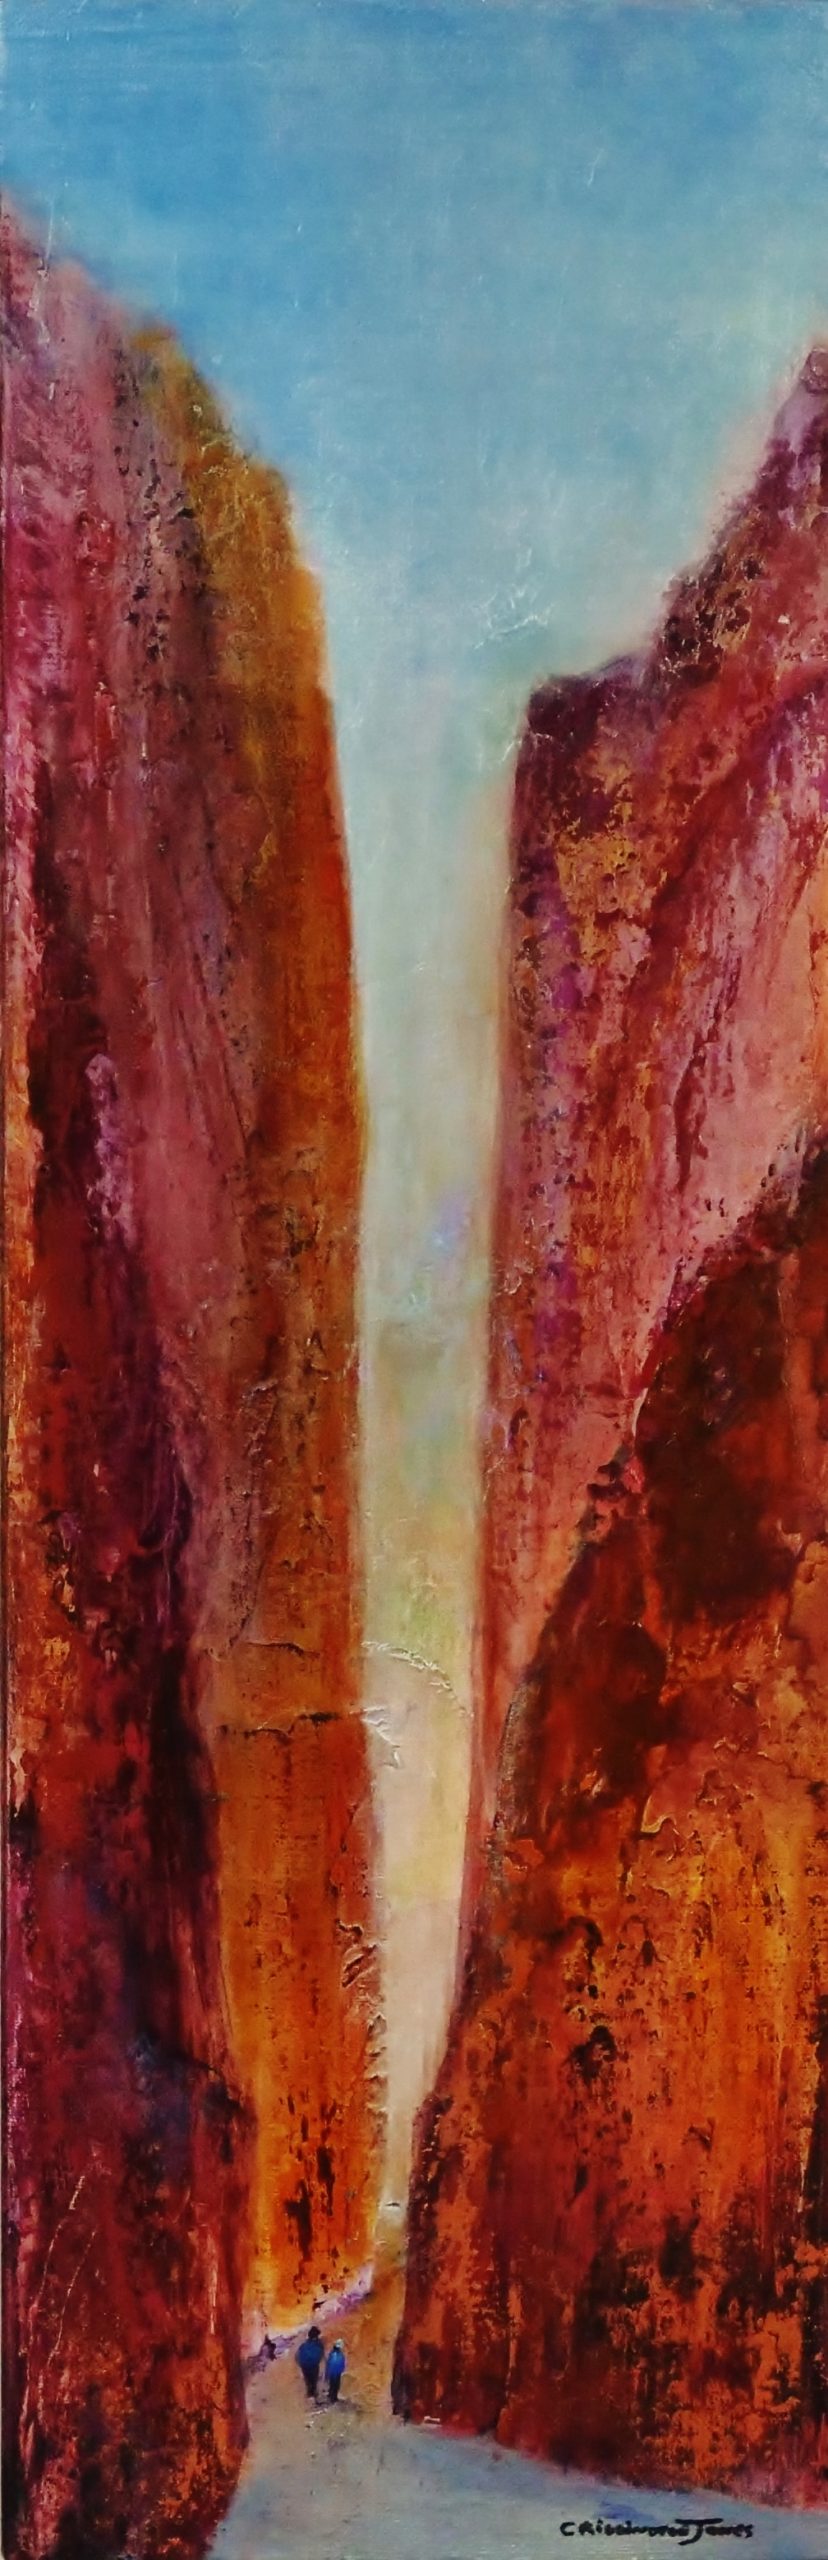 painting of a gorge in the outback